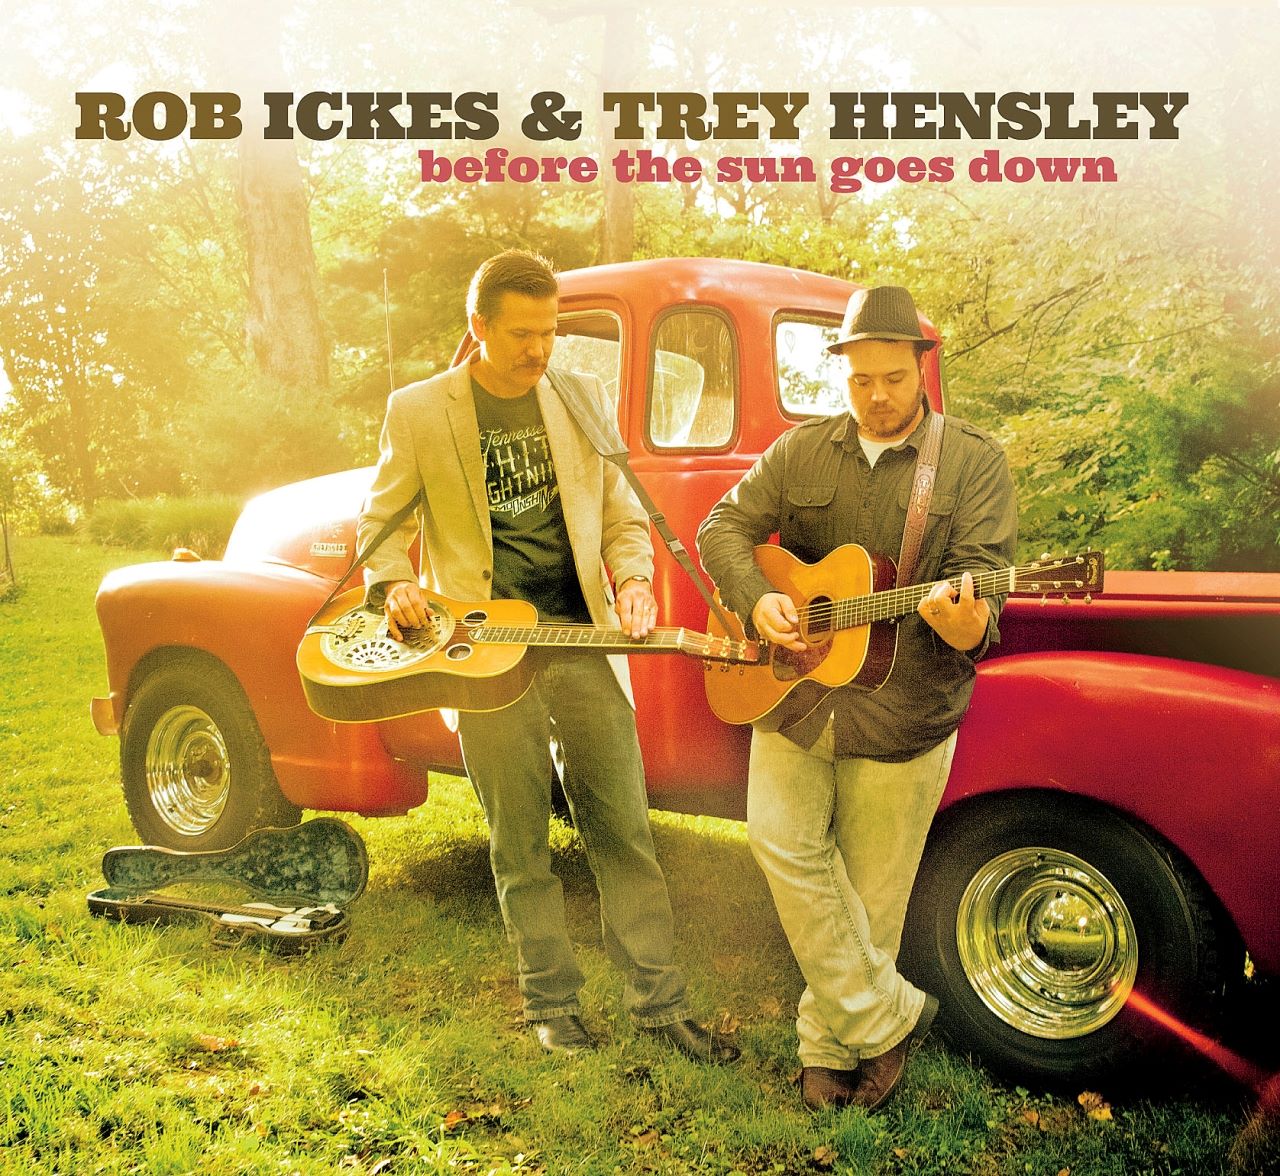 Rob Ickes & Trey Hensley - Before The Sun Goes Down cover album